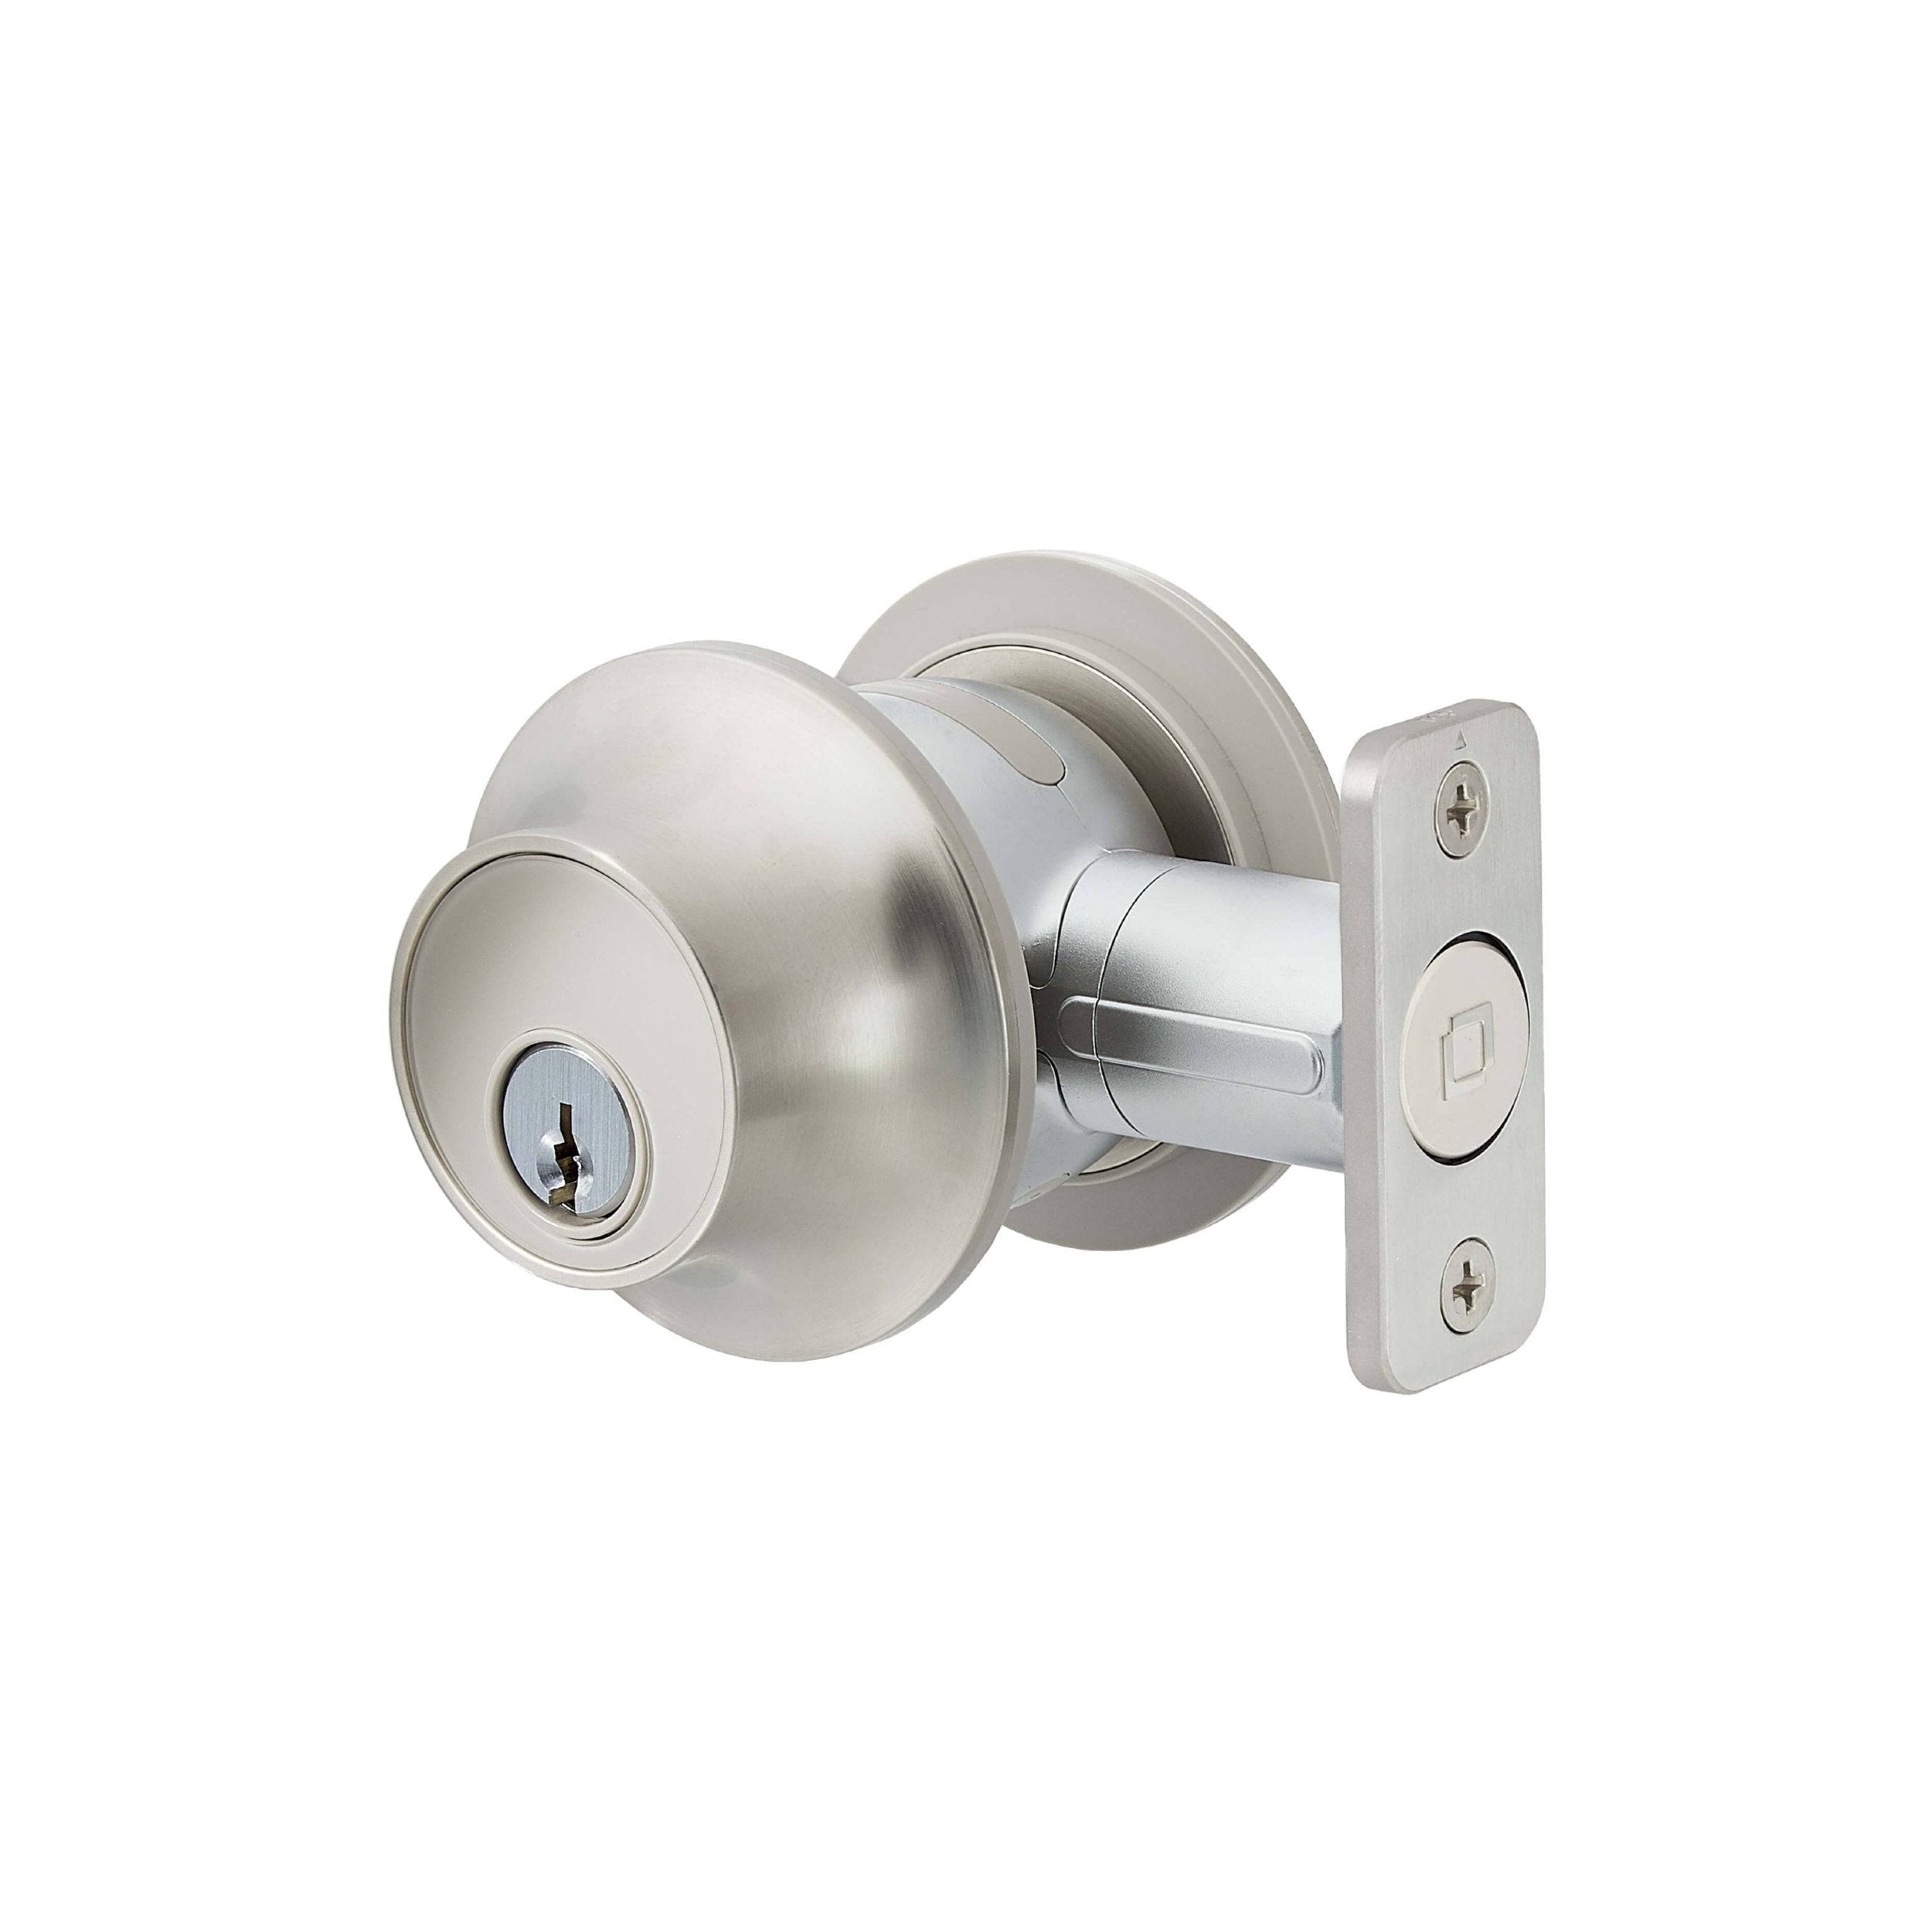 Level Touch Edition Smart Lock